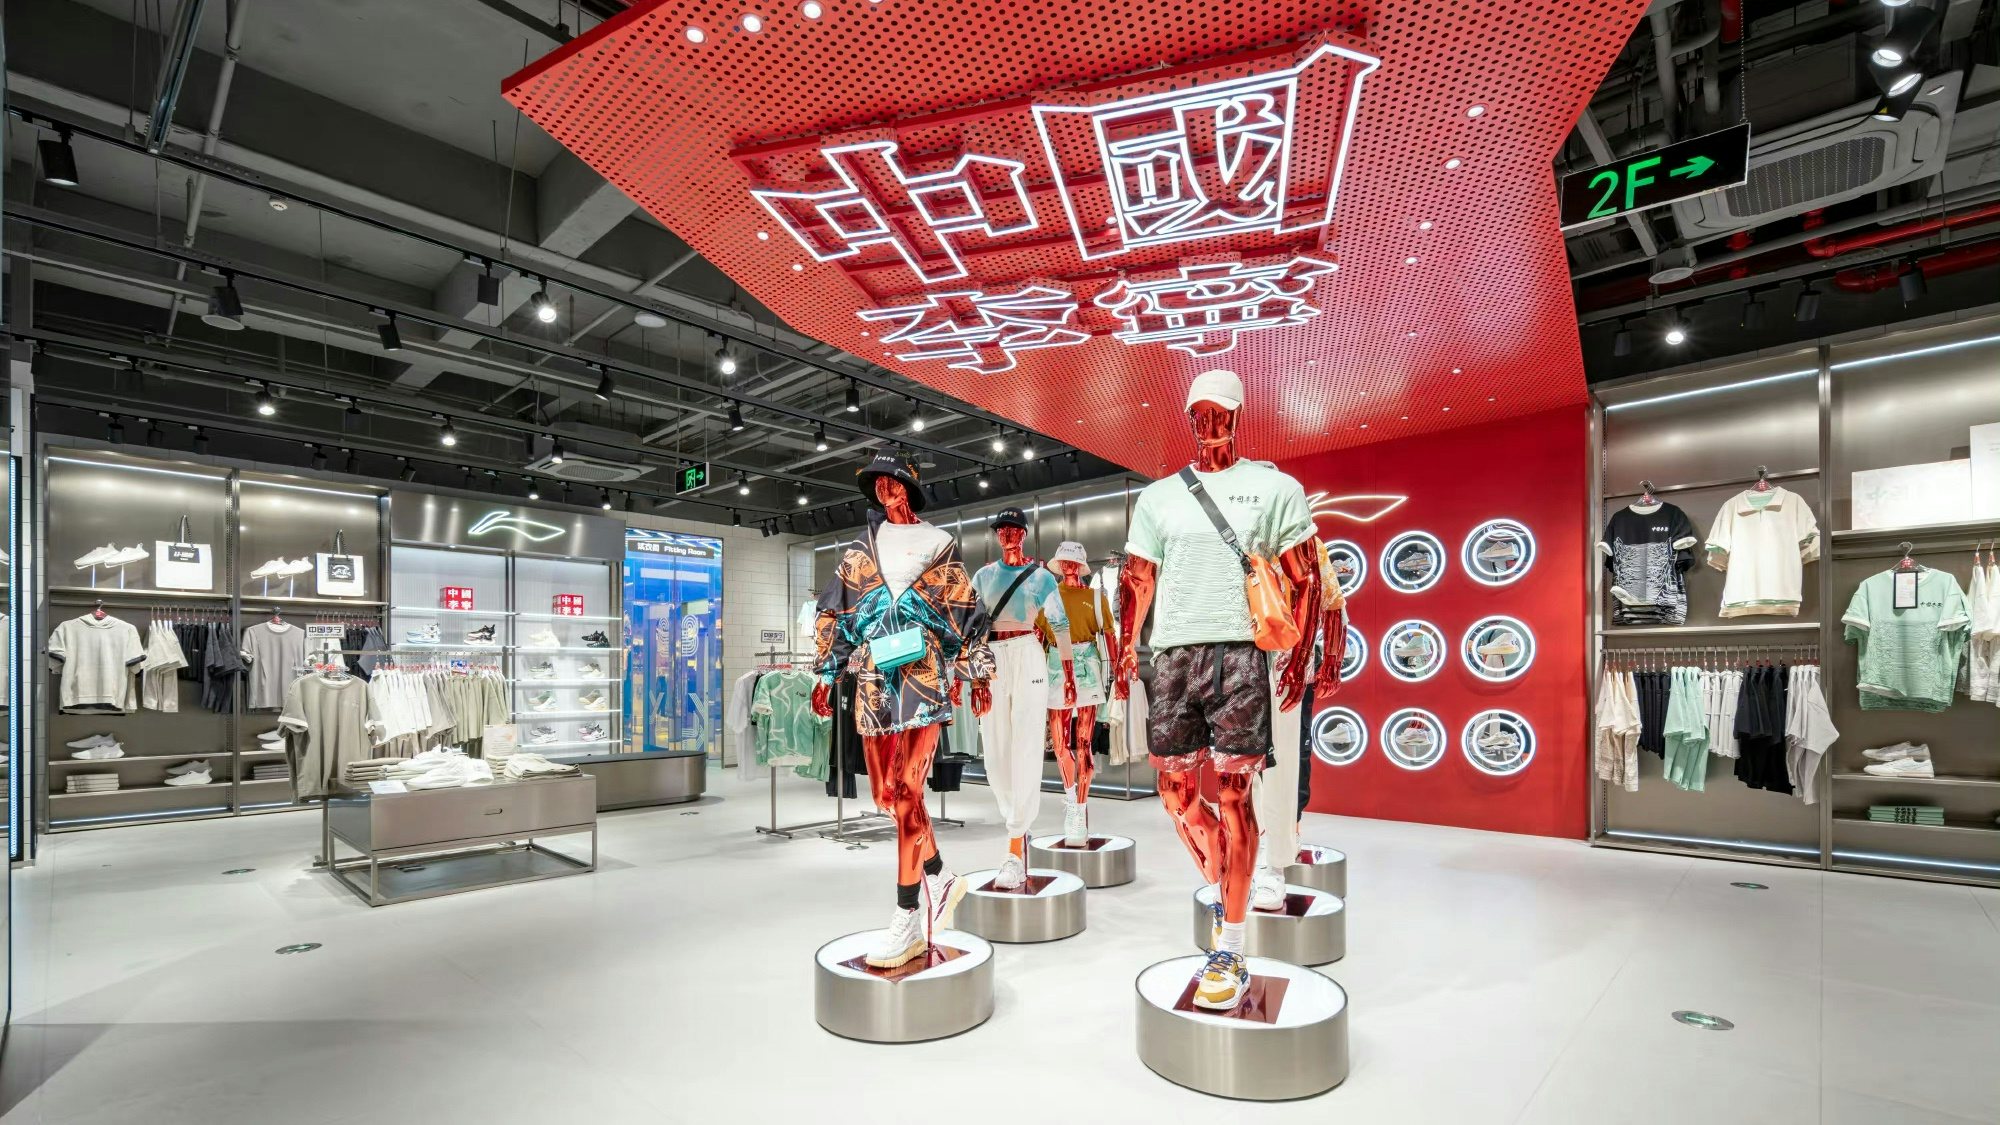 Nike and Adidas are among the brands retreating from China’s northern neighbor following its invasion of Ukraine, leaving a gap for Li-Ning to fill. But the sportswear giant faces risks and rewards. Photo: Li-Ning